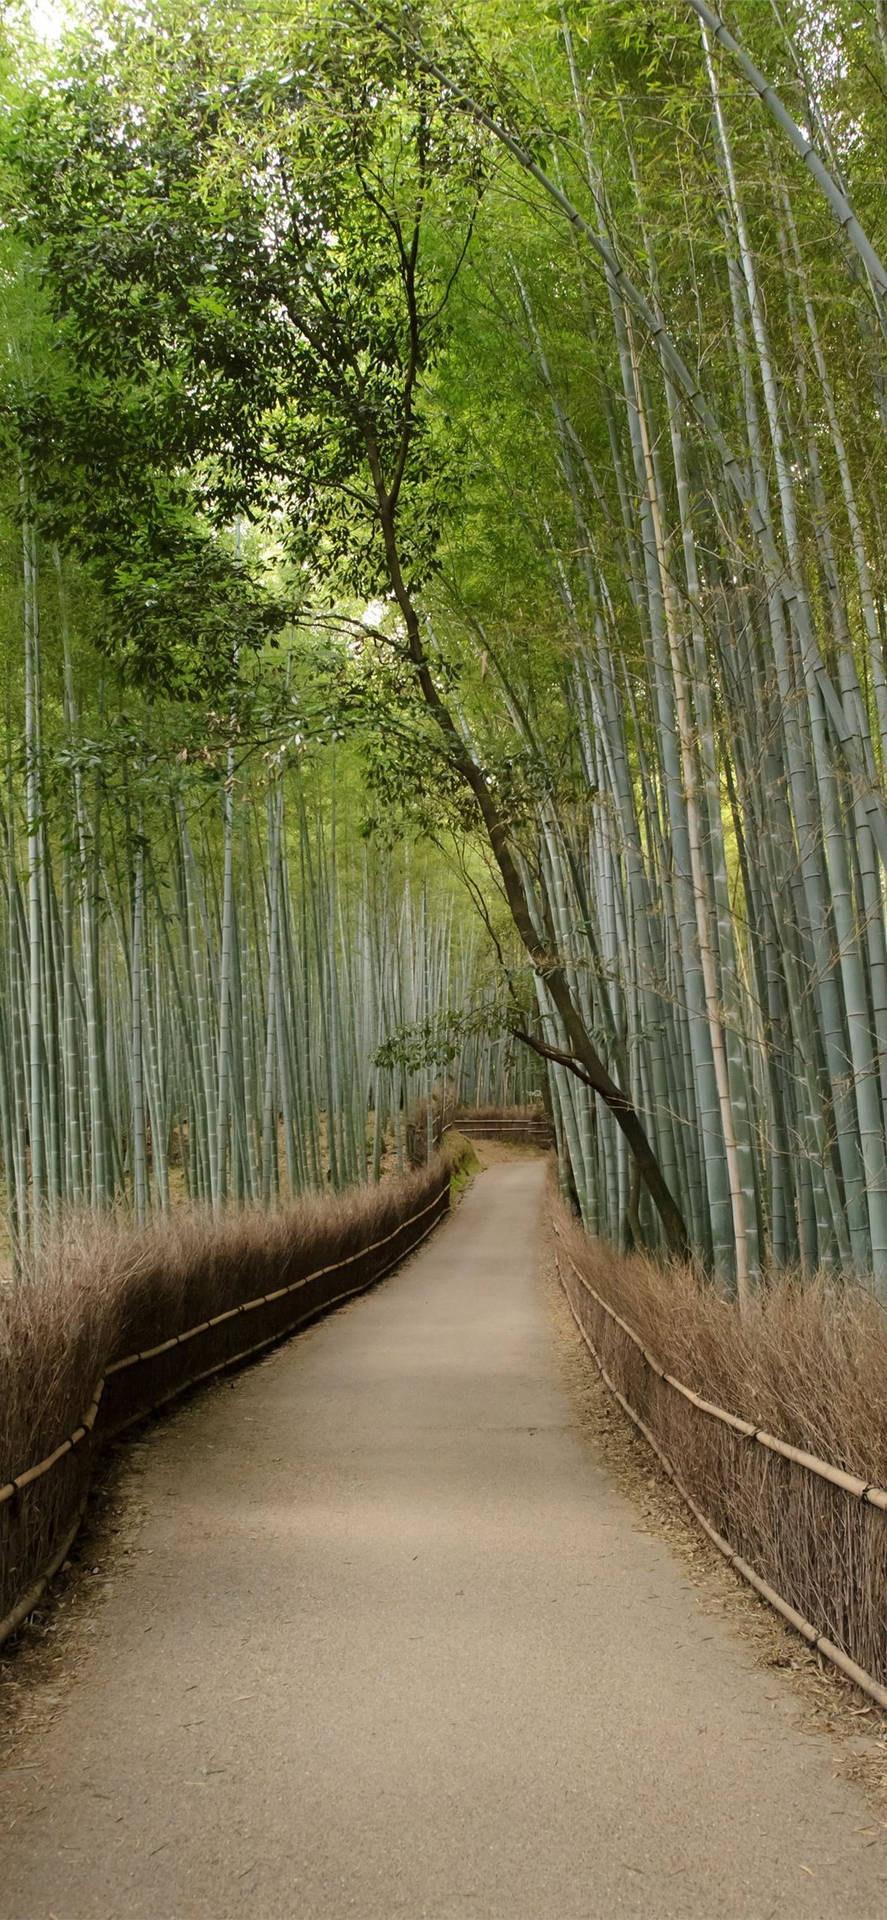 Clean Bamboo Pathway Iphone